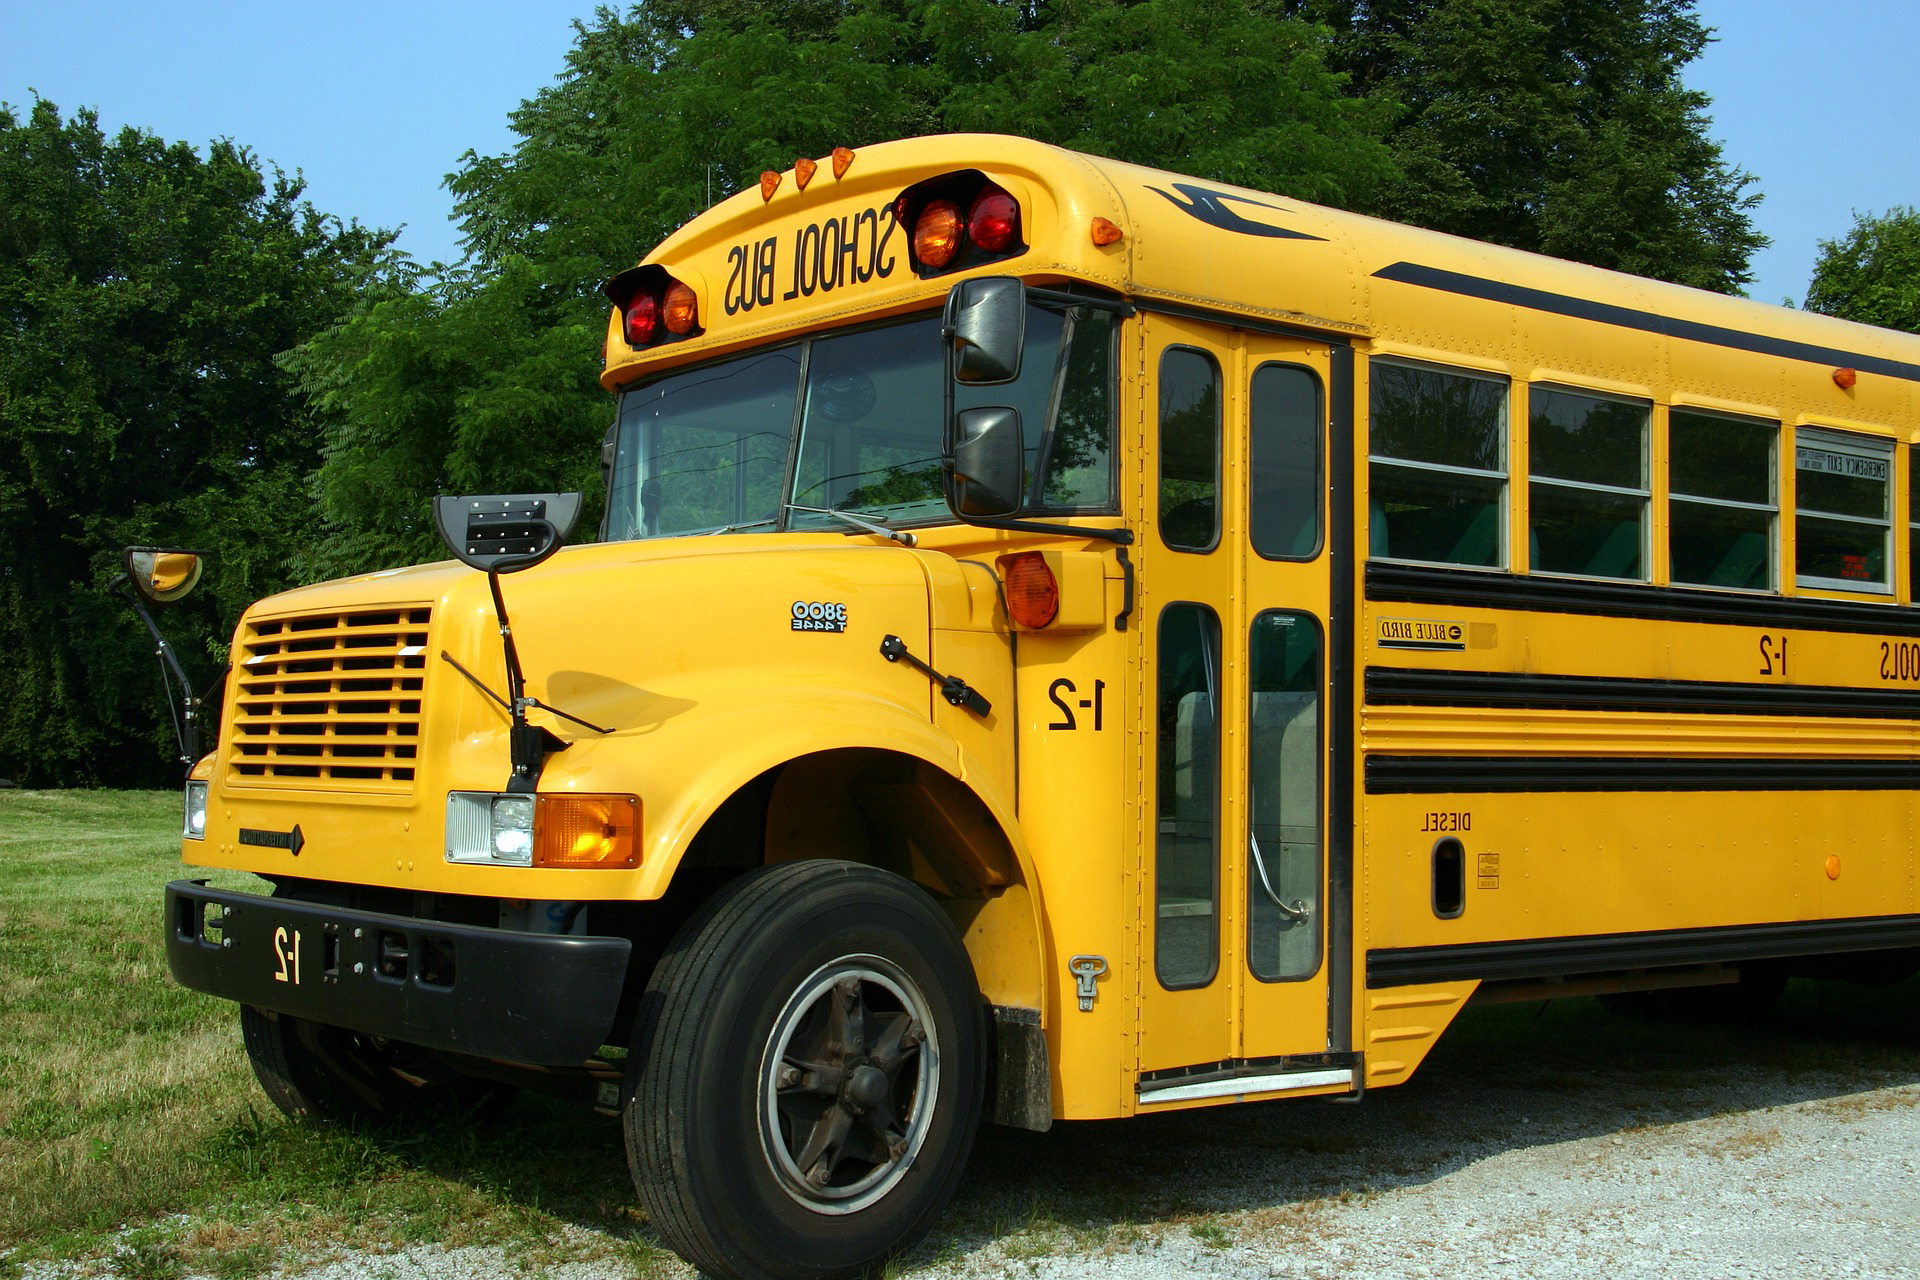 Rockland County and Orange County School Bus drivers are required to have a Commercial Drivers License